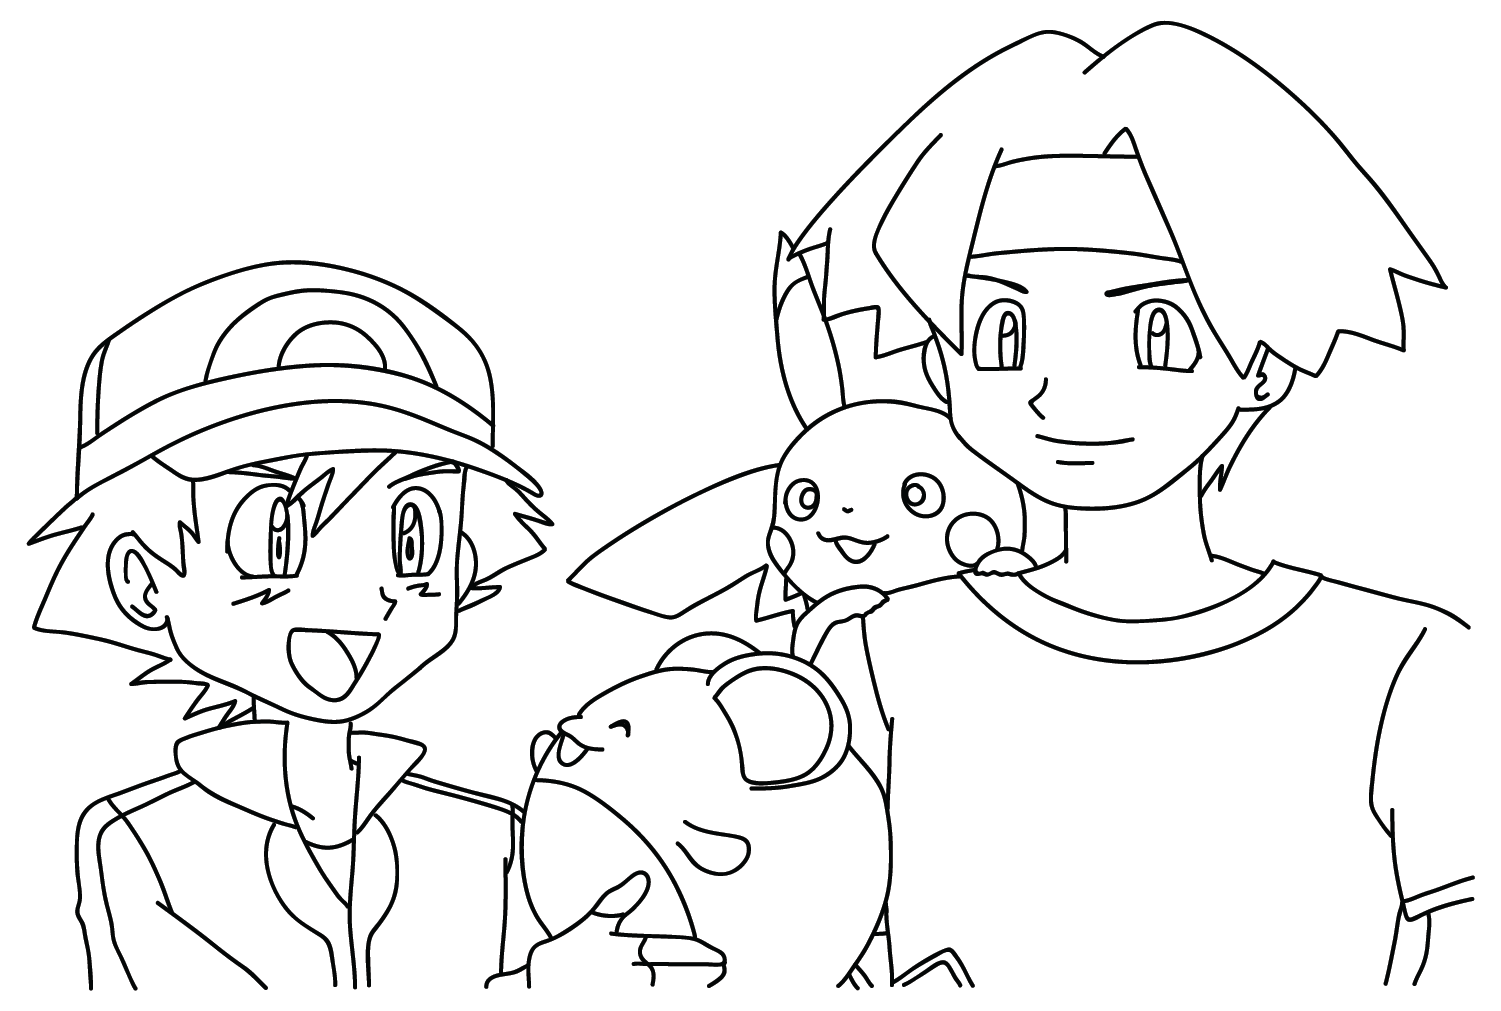 Tracey Sketchit And Ash Coloring Page from Ash Ketchum